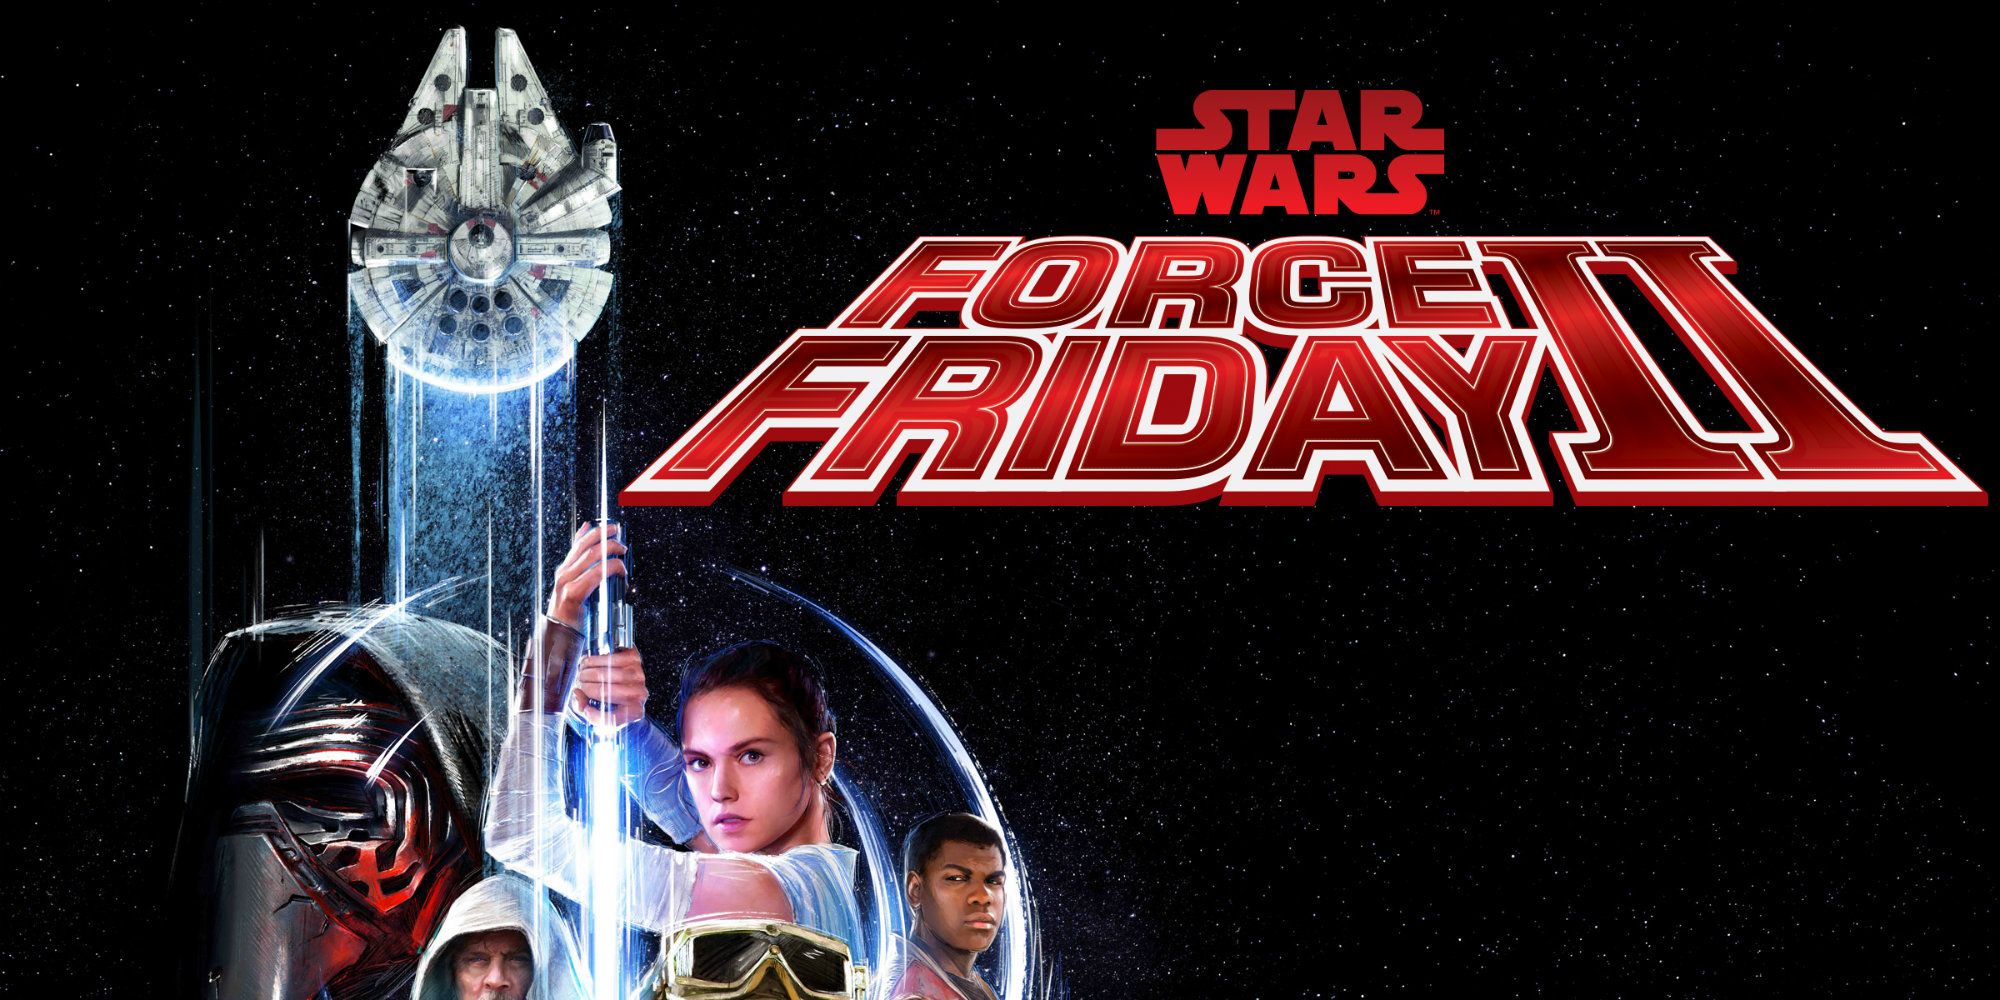 Star Wars Force Friday 2